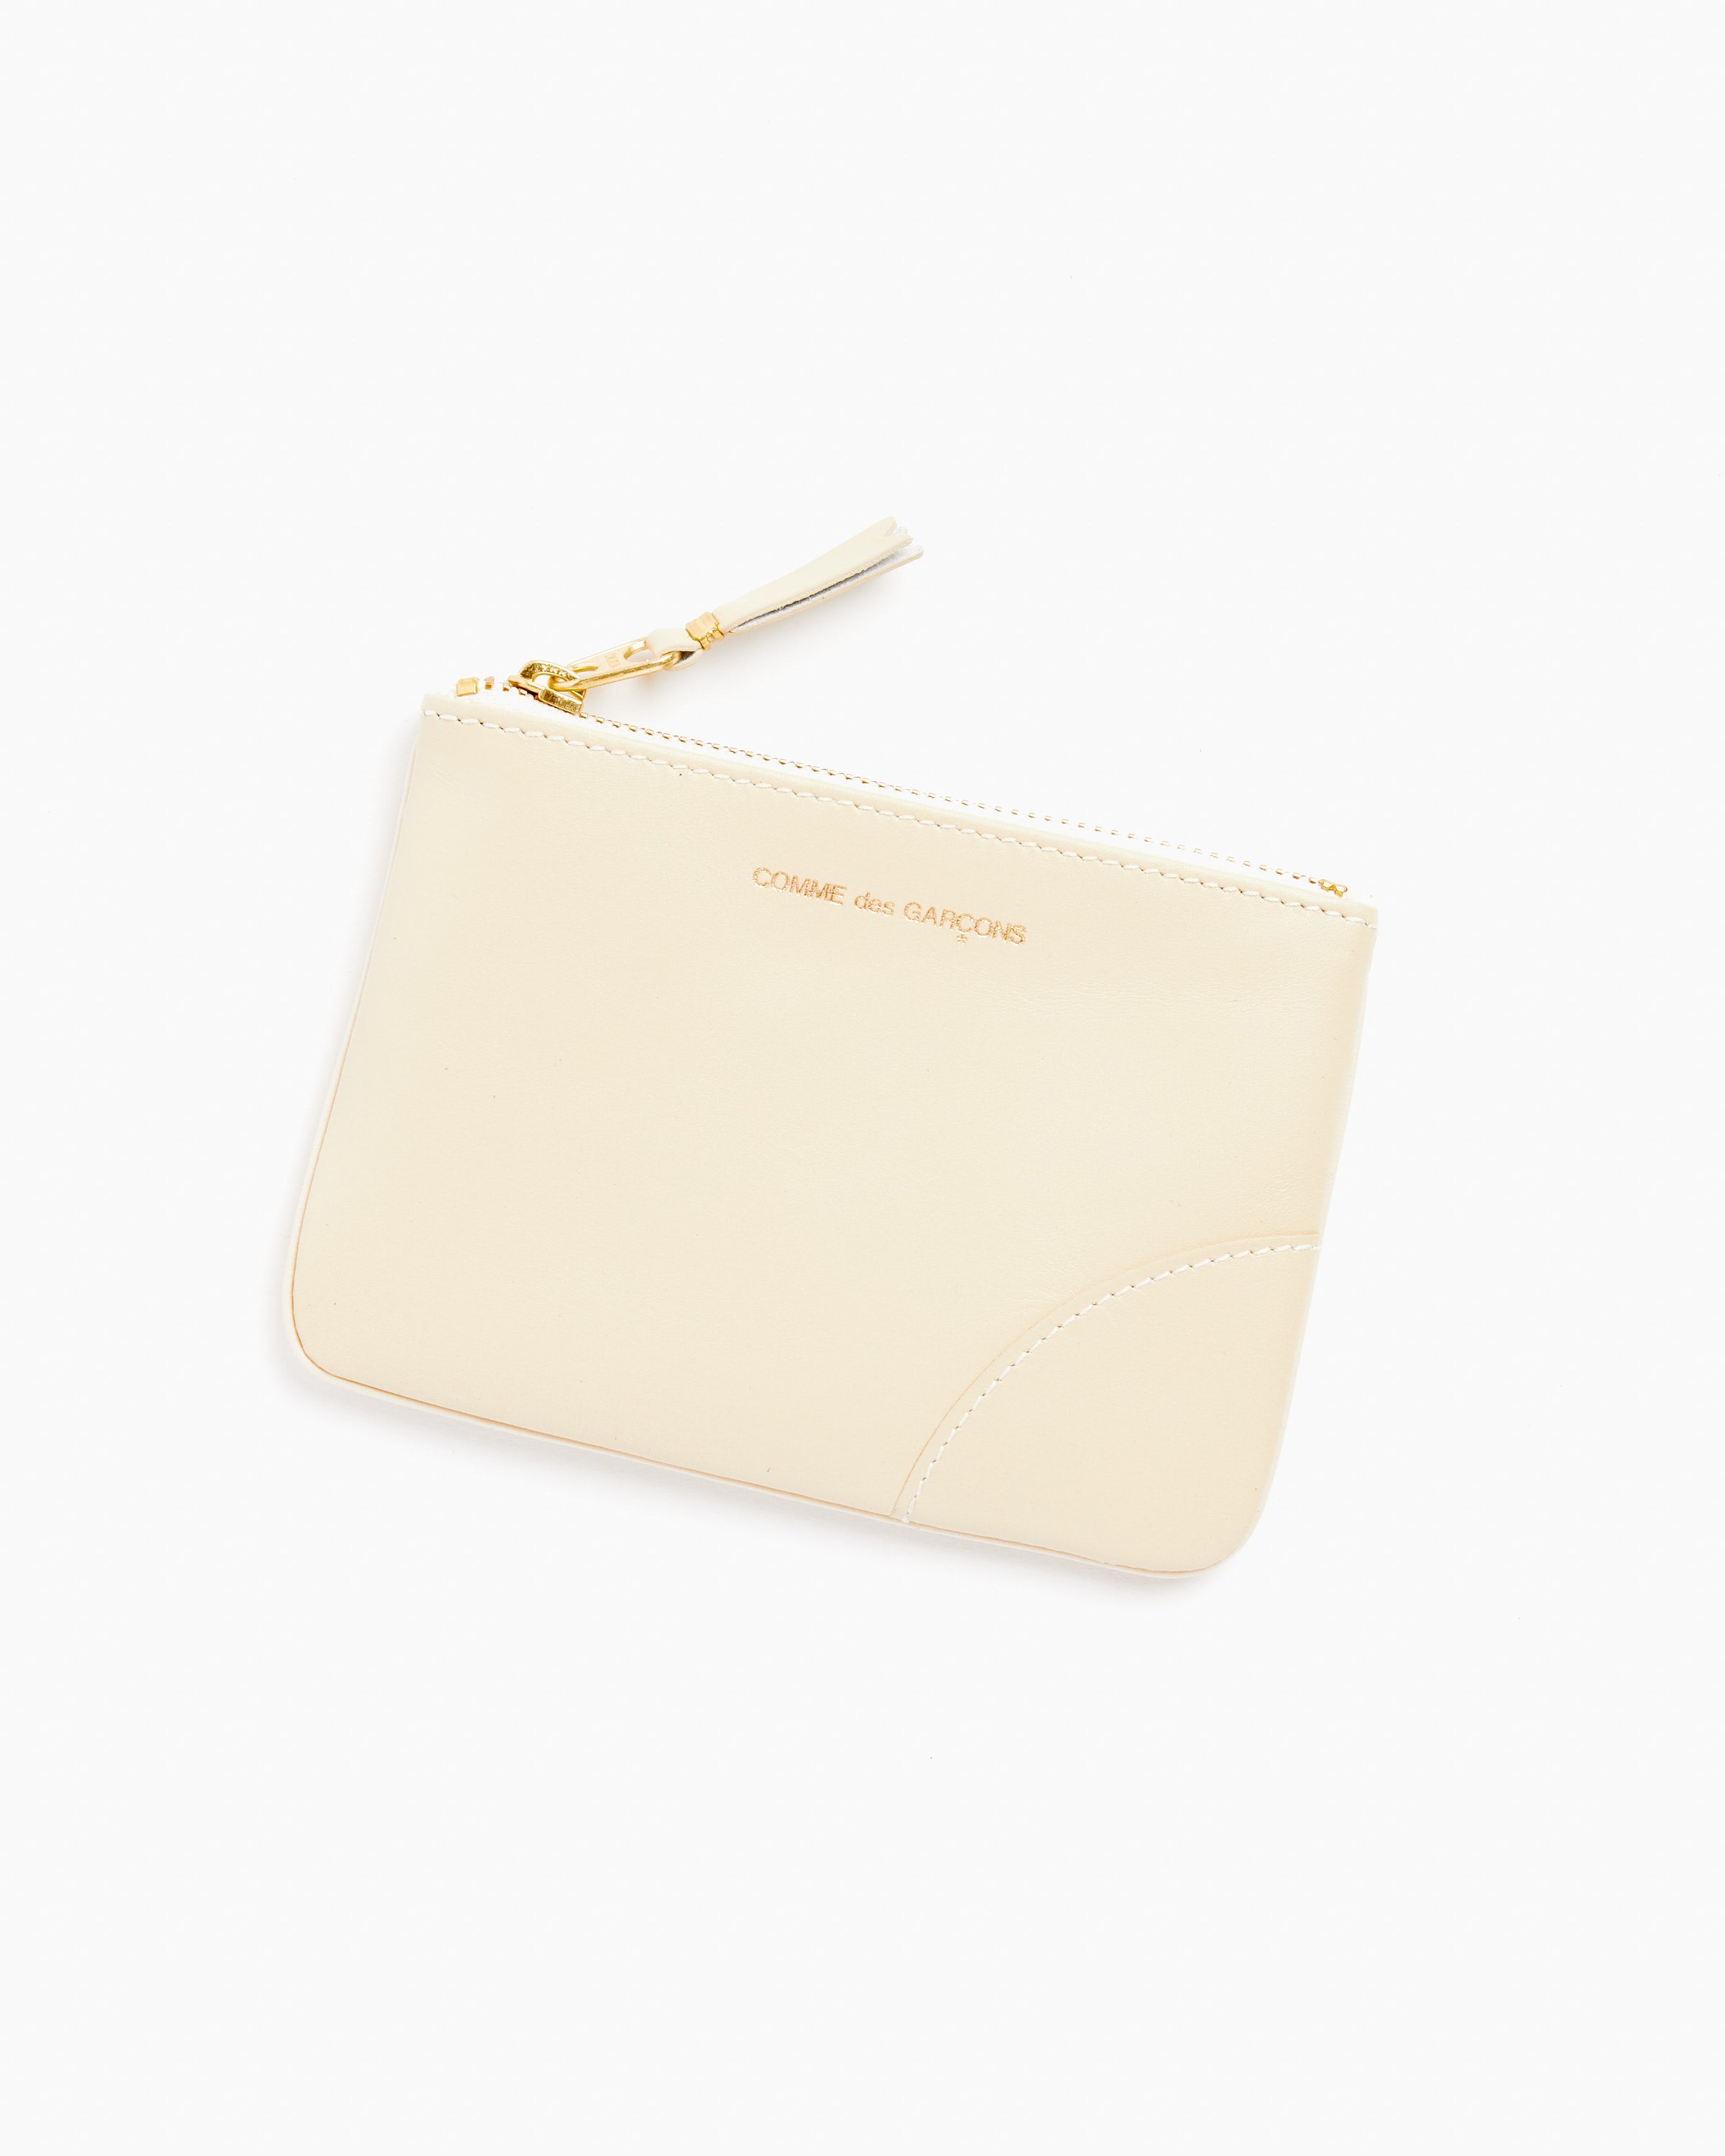 Classic Zip Pouch in Off White